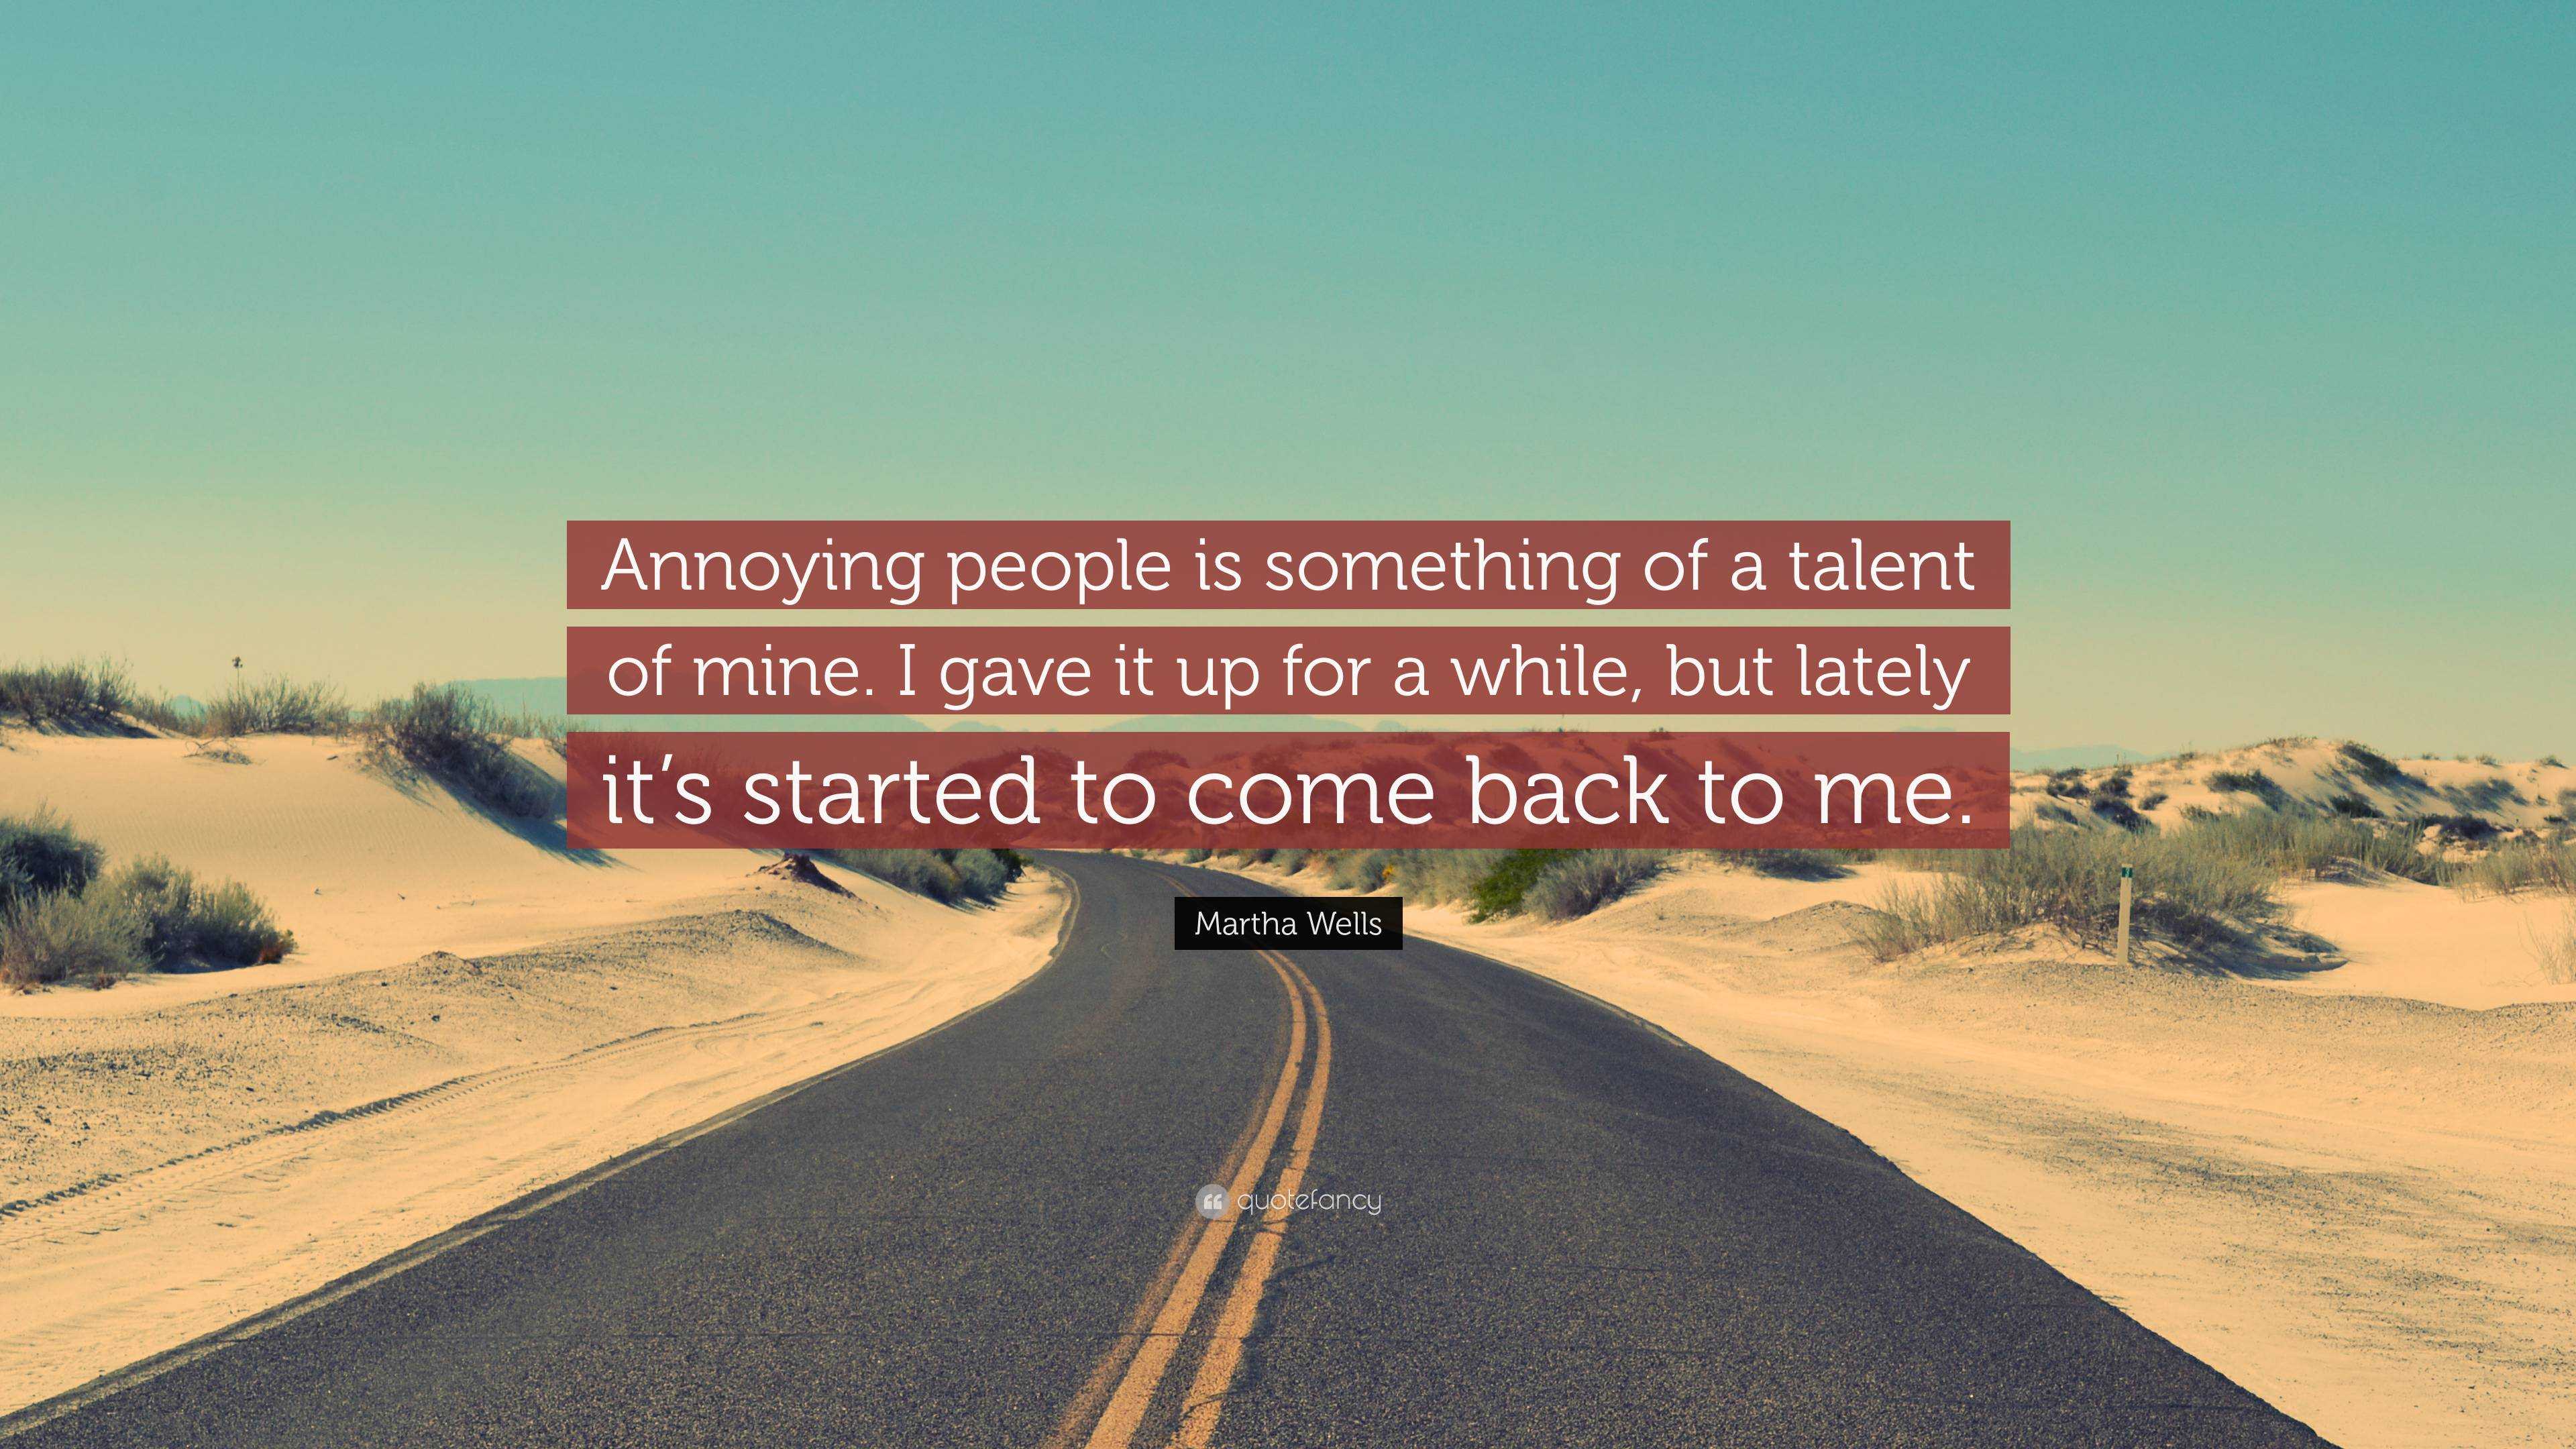 Talented People Have an Annoying Side